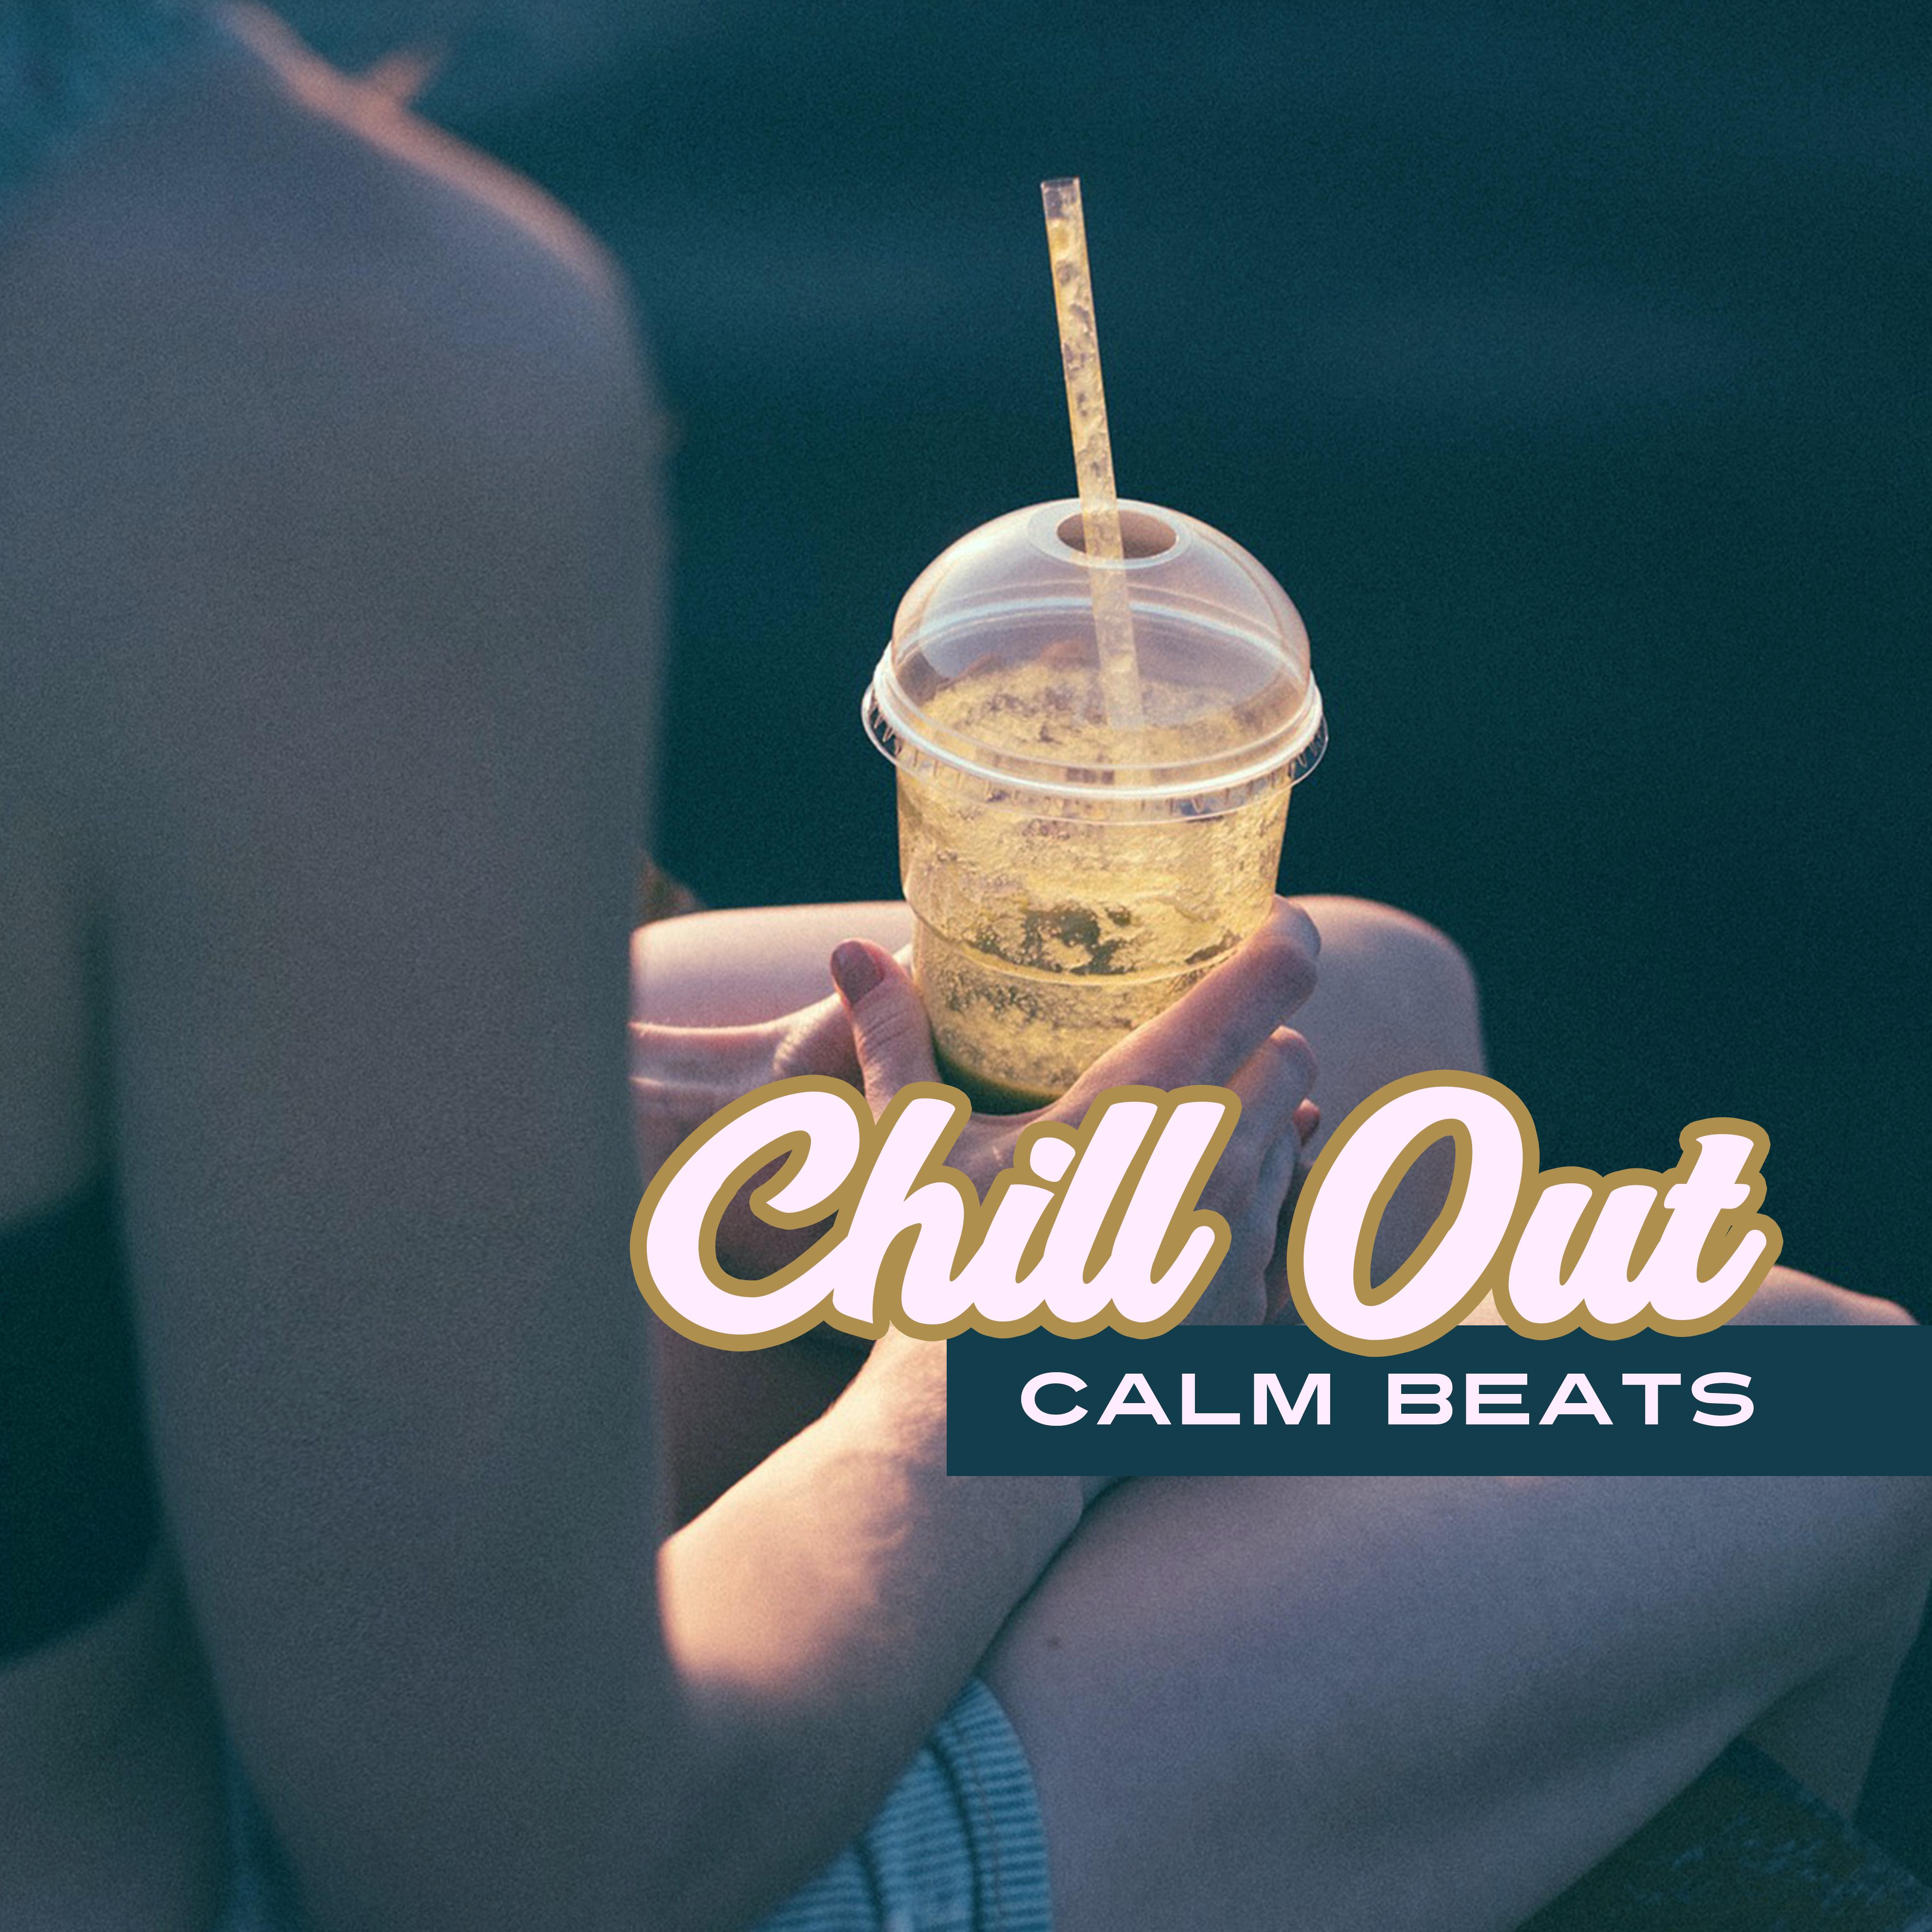 Chill Out Calm Beats